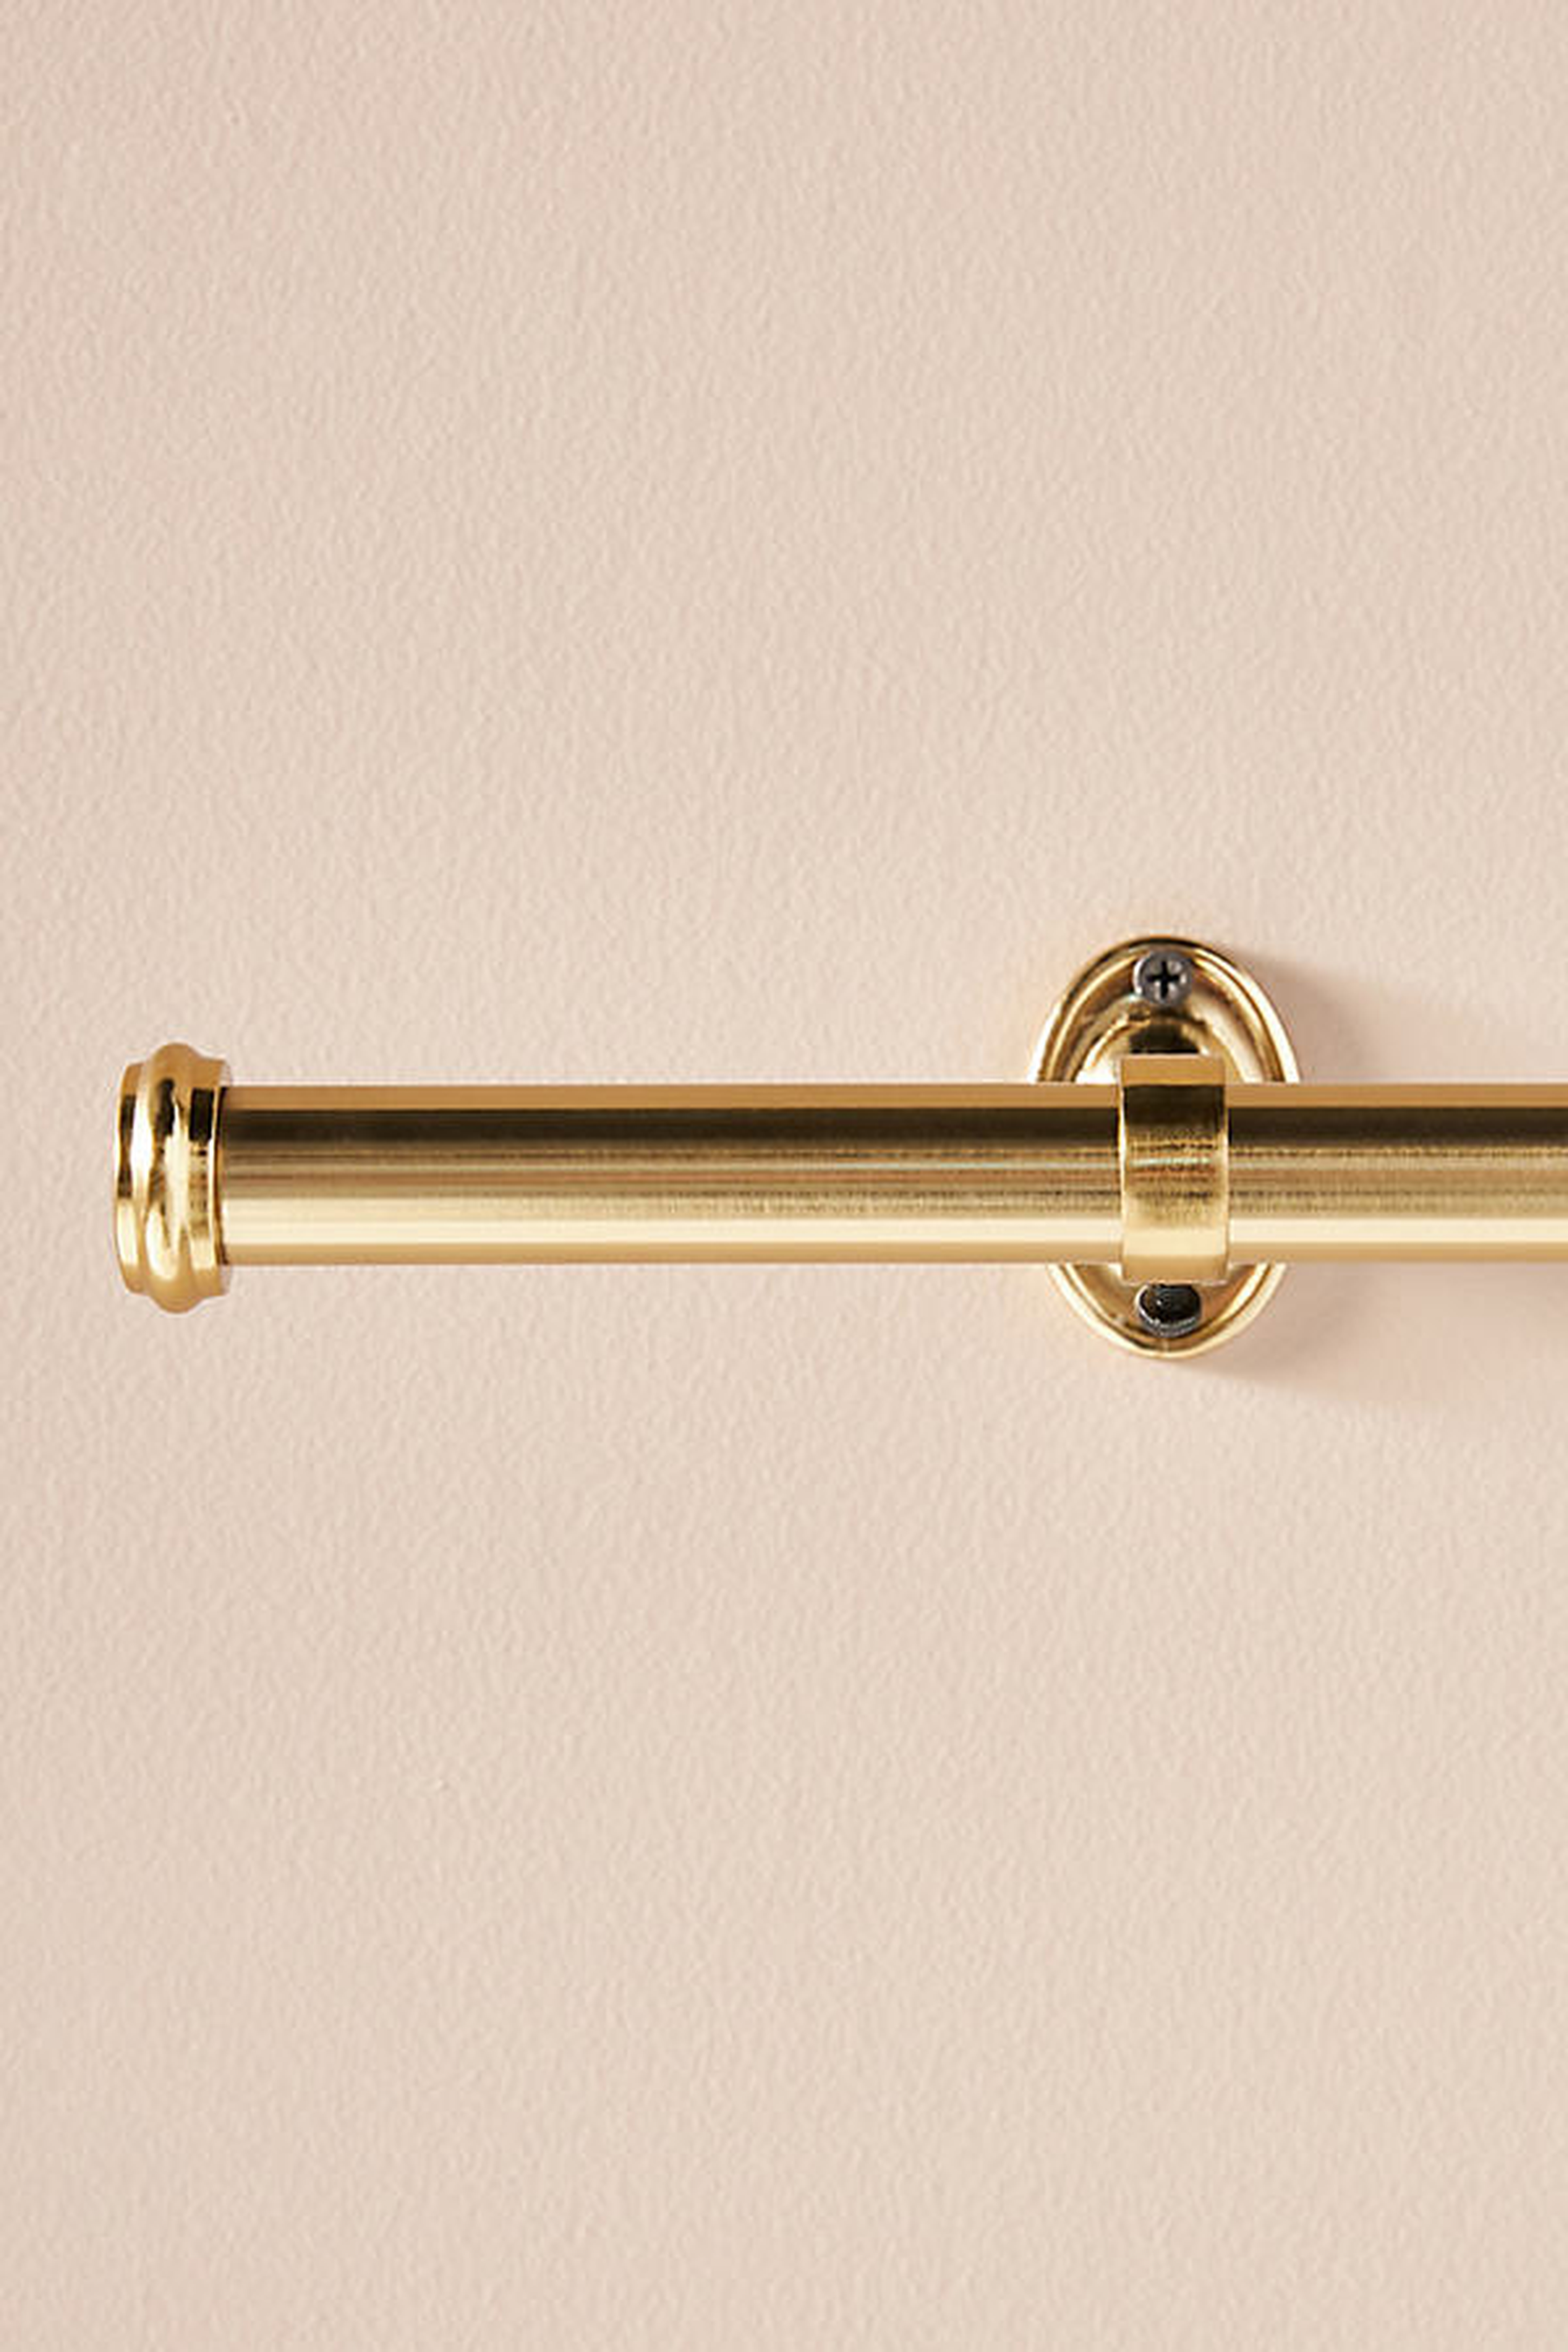 Smithery Curtain Rod By Anthropologie in Gold Size L - Anthropologie